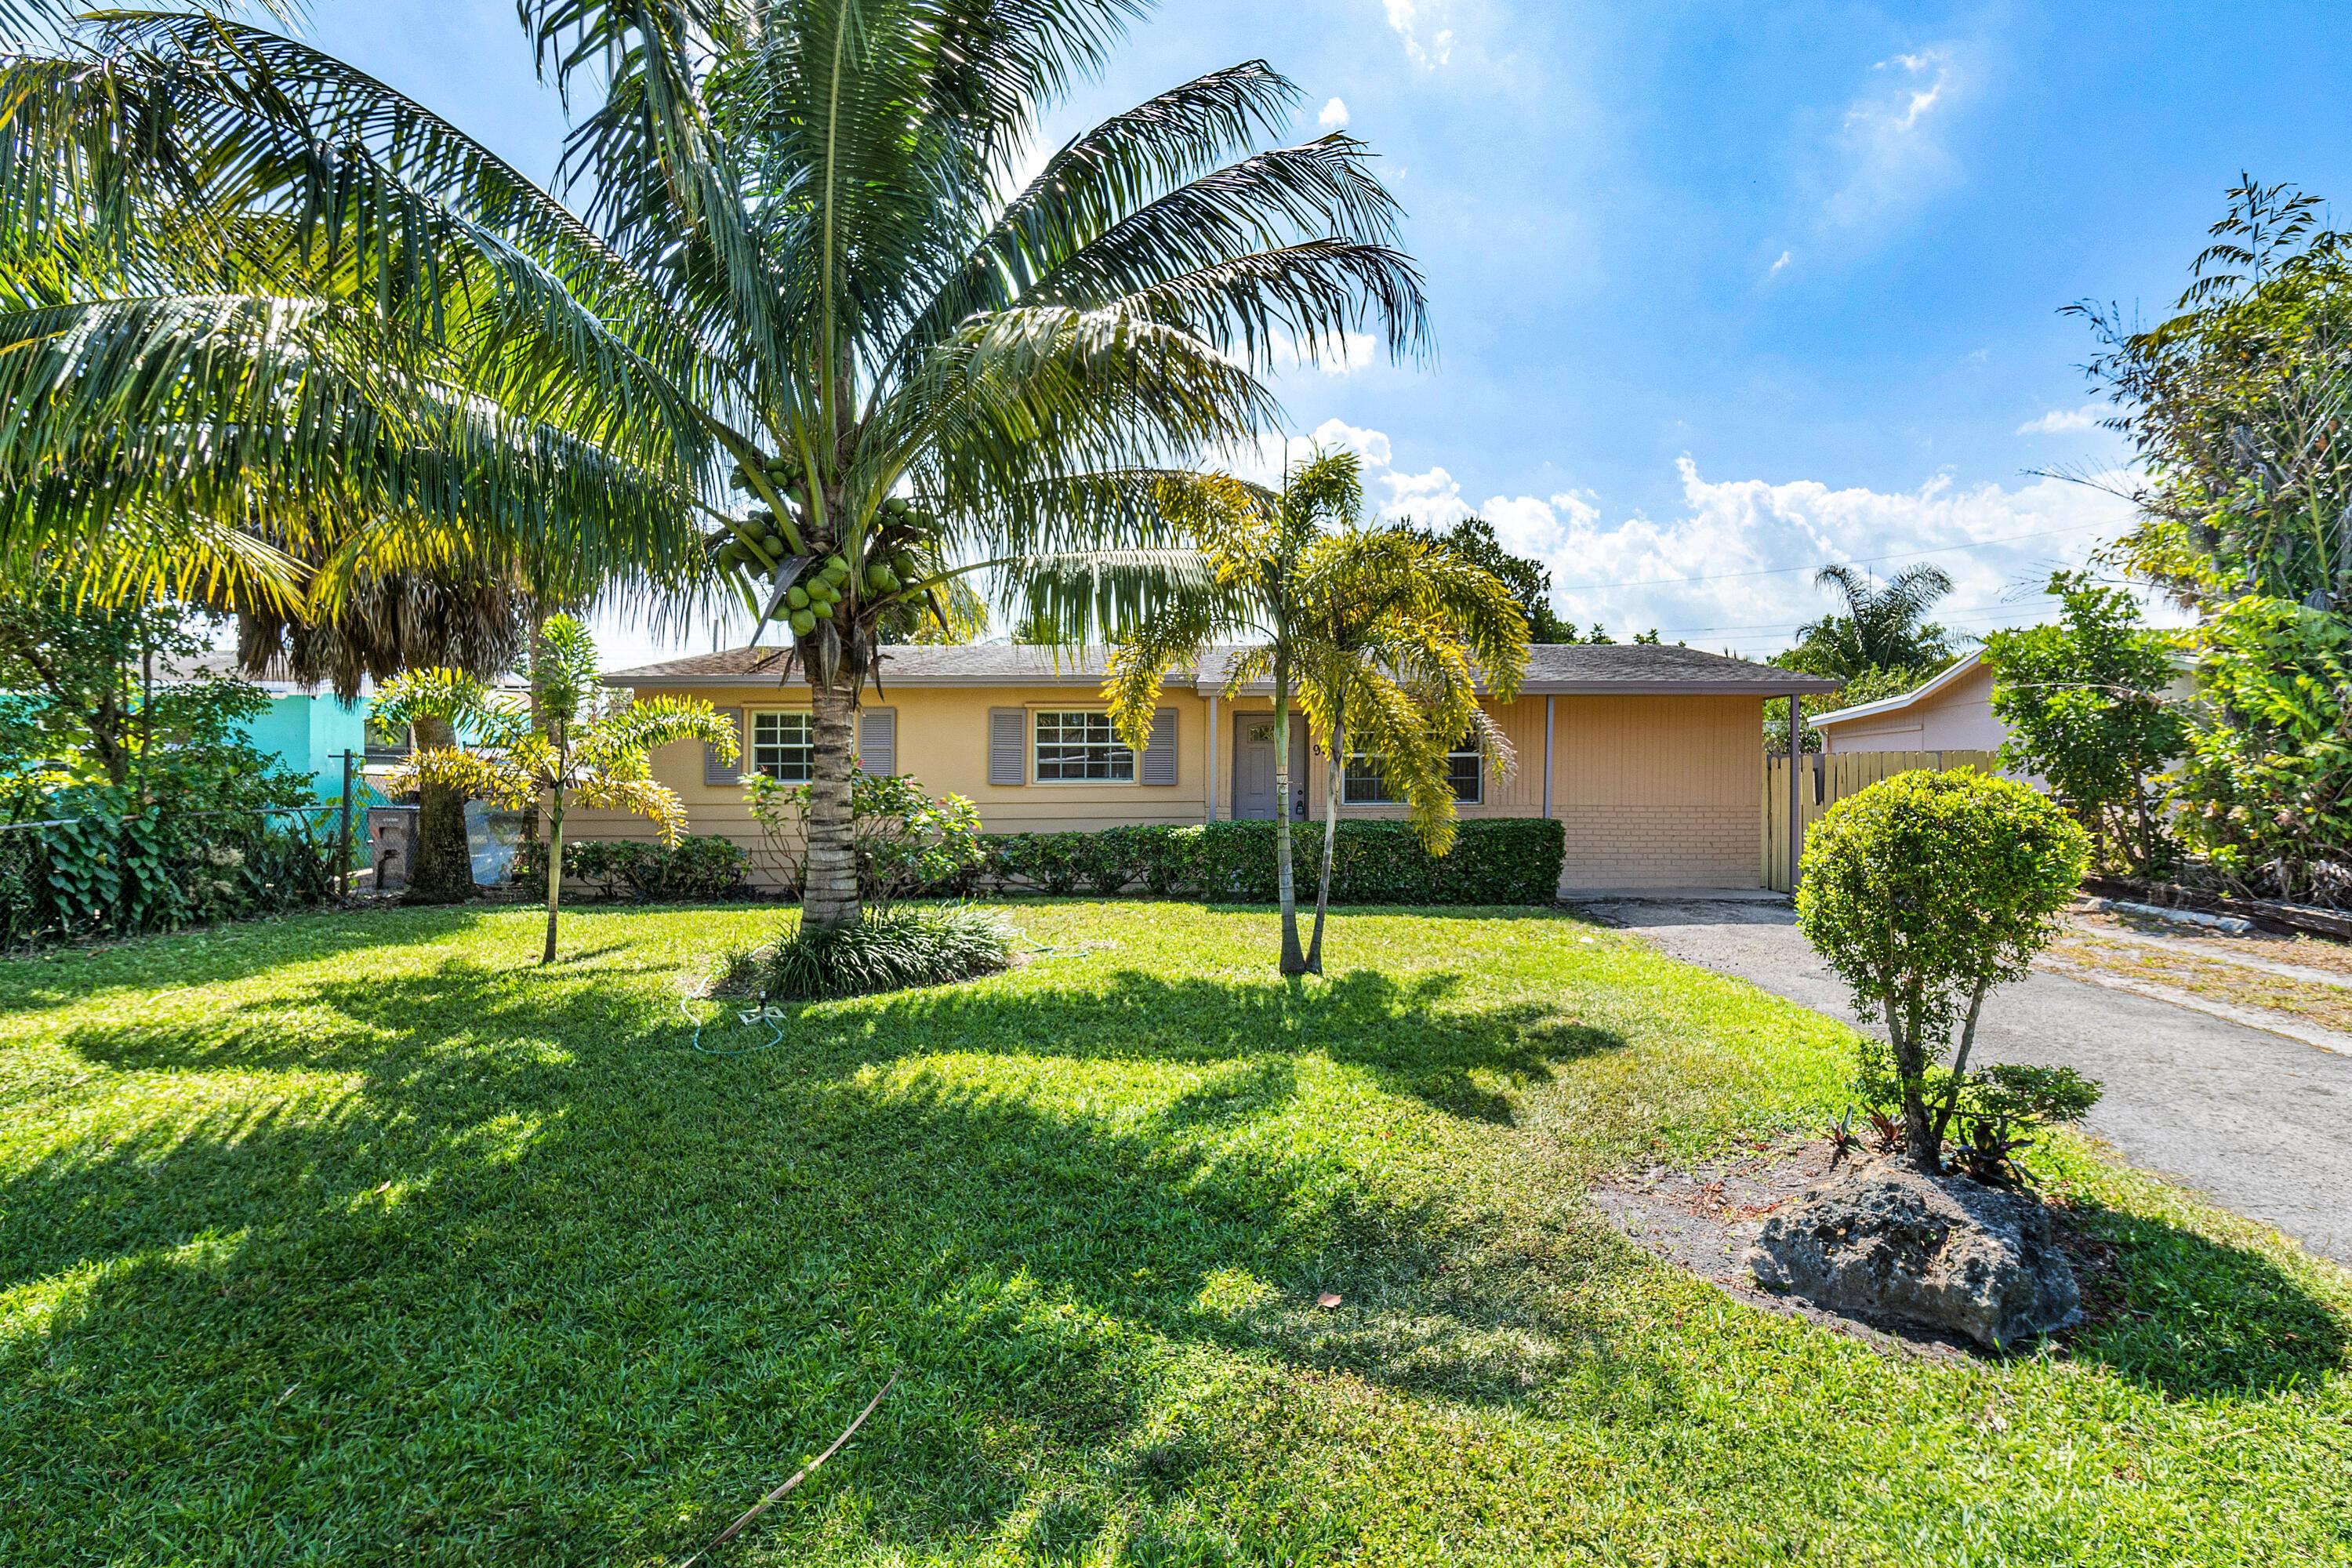 PERFECT OPPORTUNITY TO OWNS A 4 BEDROOMS AND 2 BATH IN THE HEART OF WEST PALM BEACH.